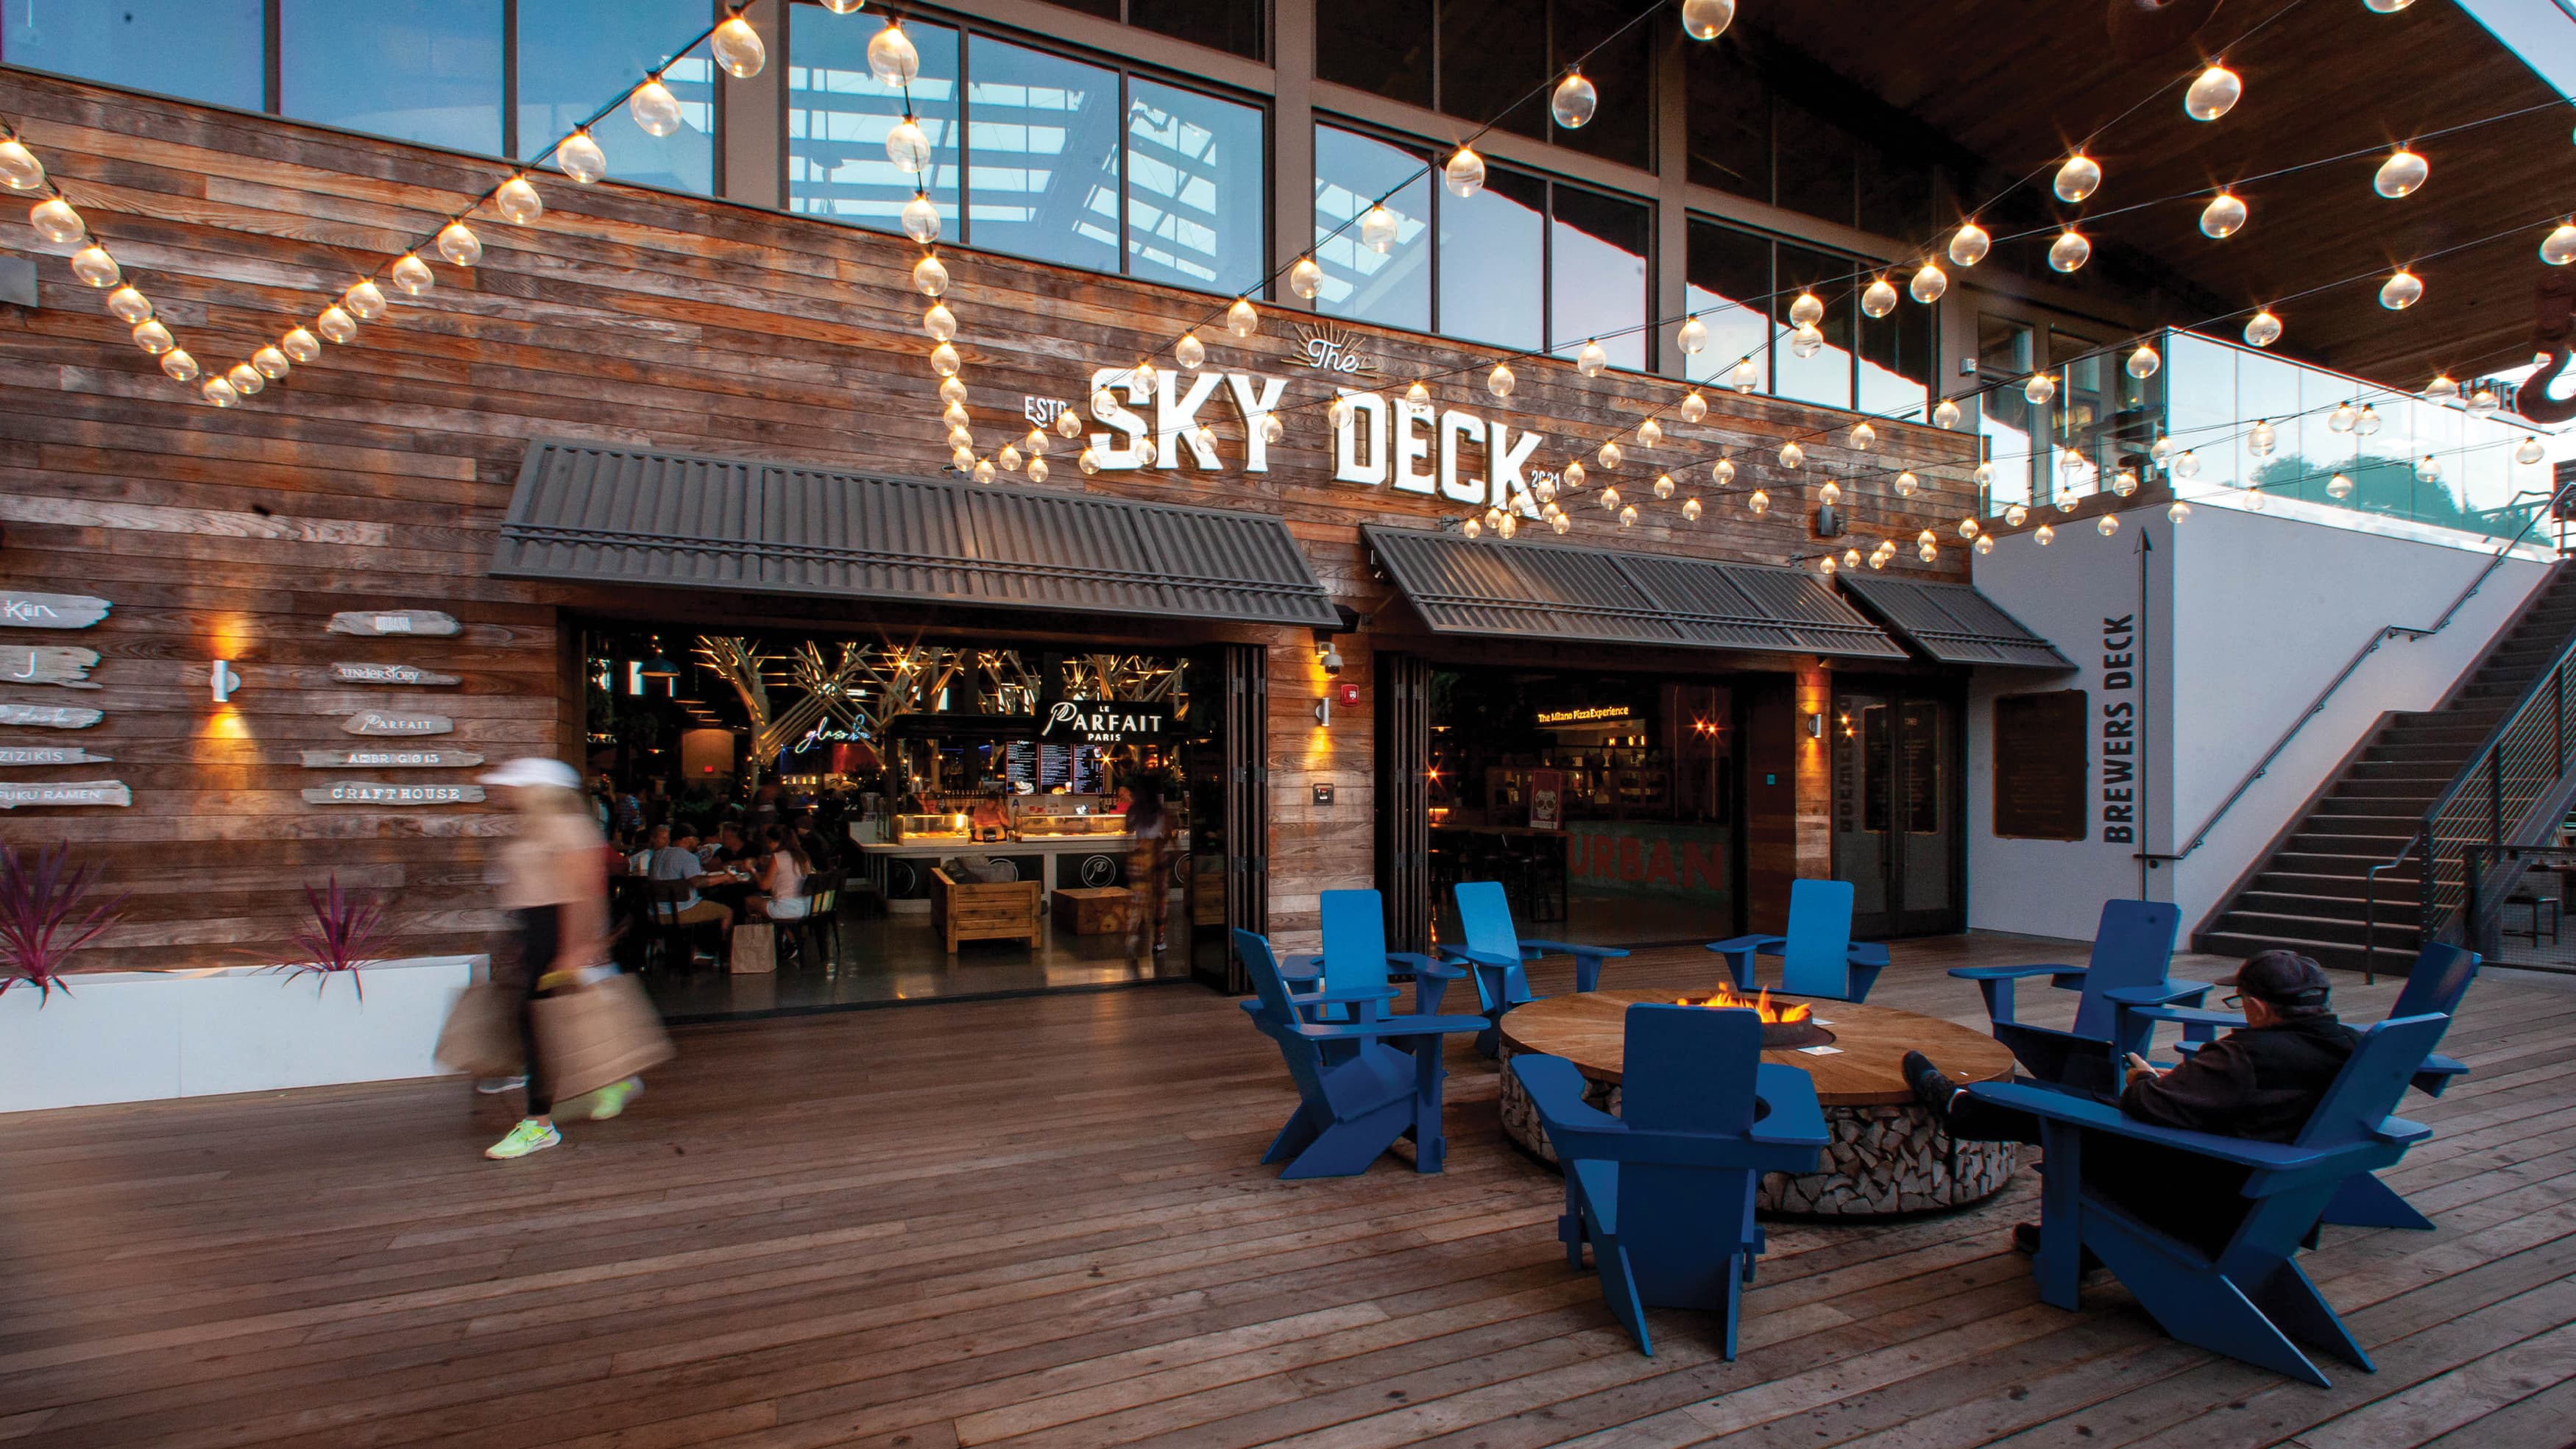 Exterior wood building facade with painted Skydeck logo, cafe lights, and a fire pit with seating